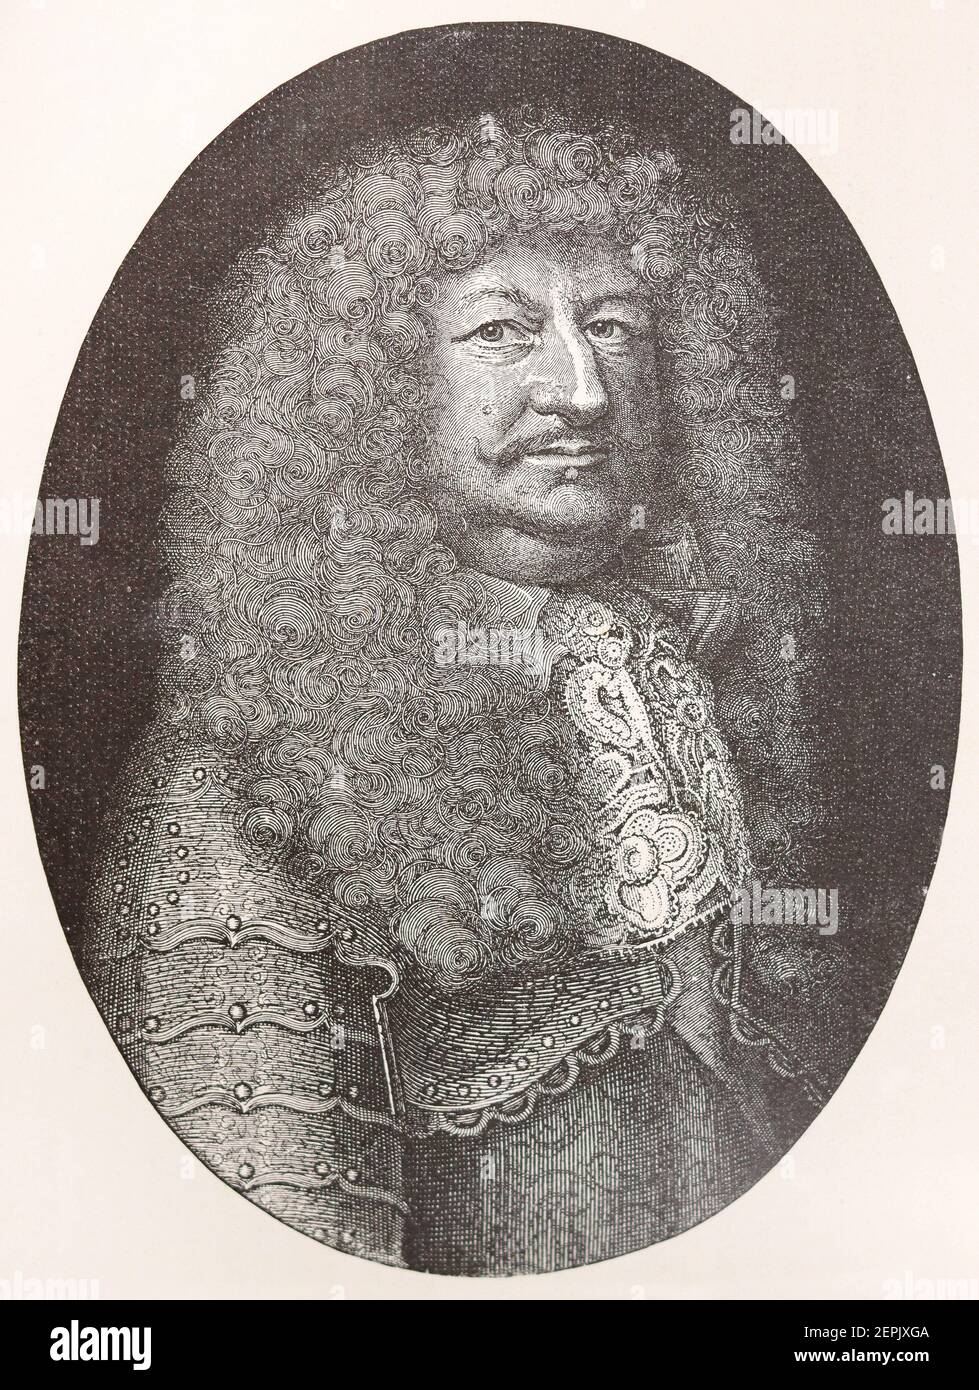 Frederick William (German: Friedrich Wilhelm; 16 February 1620 – 29 April 1688) was Elector of Brandenburg and Duke of Prussia, thus ruler of Brandenburg-Prussia, from 1640 until his death in 1688. A member of the House of Hohenzollern, he is popularly known as 'the Great Elector' (der Große Kurfürst) because of his military and political achievements. Frederick William was a staunch pillar of the Calvinist faith, associated with the rising commercial class. Stock Photo